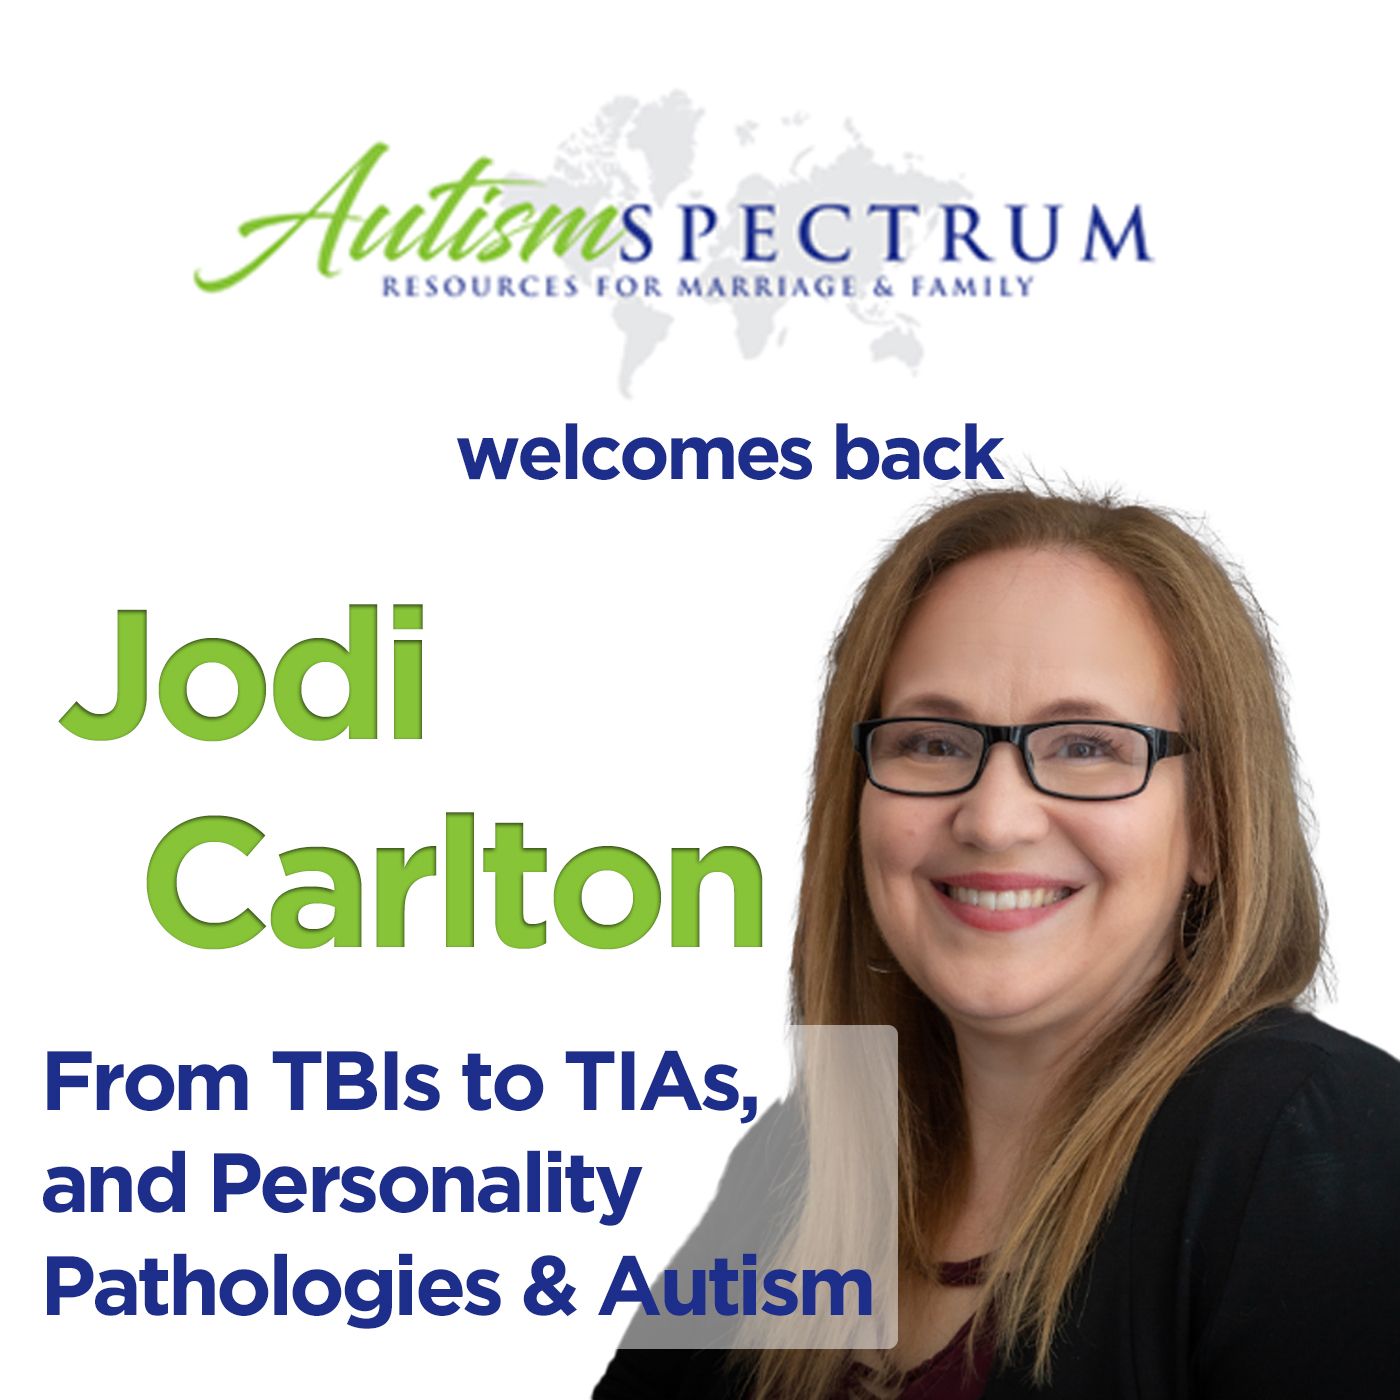 From TBIs to TIAs, and Personality Pathologies & Autism